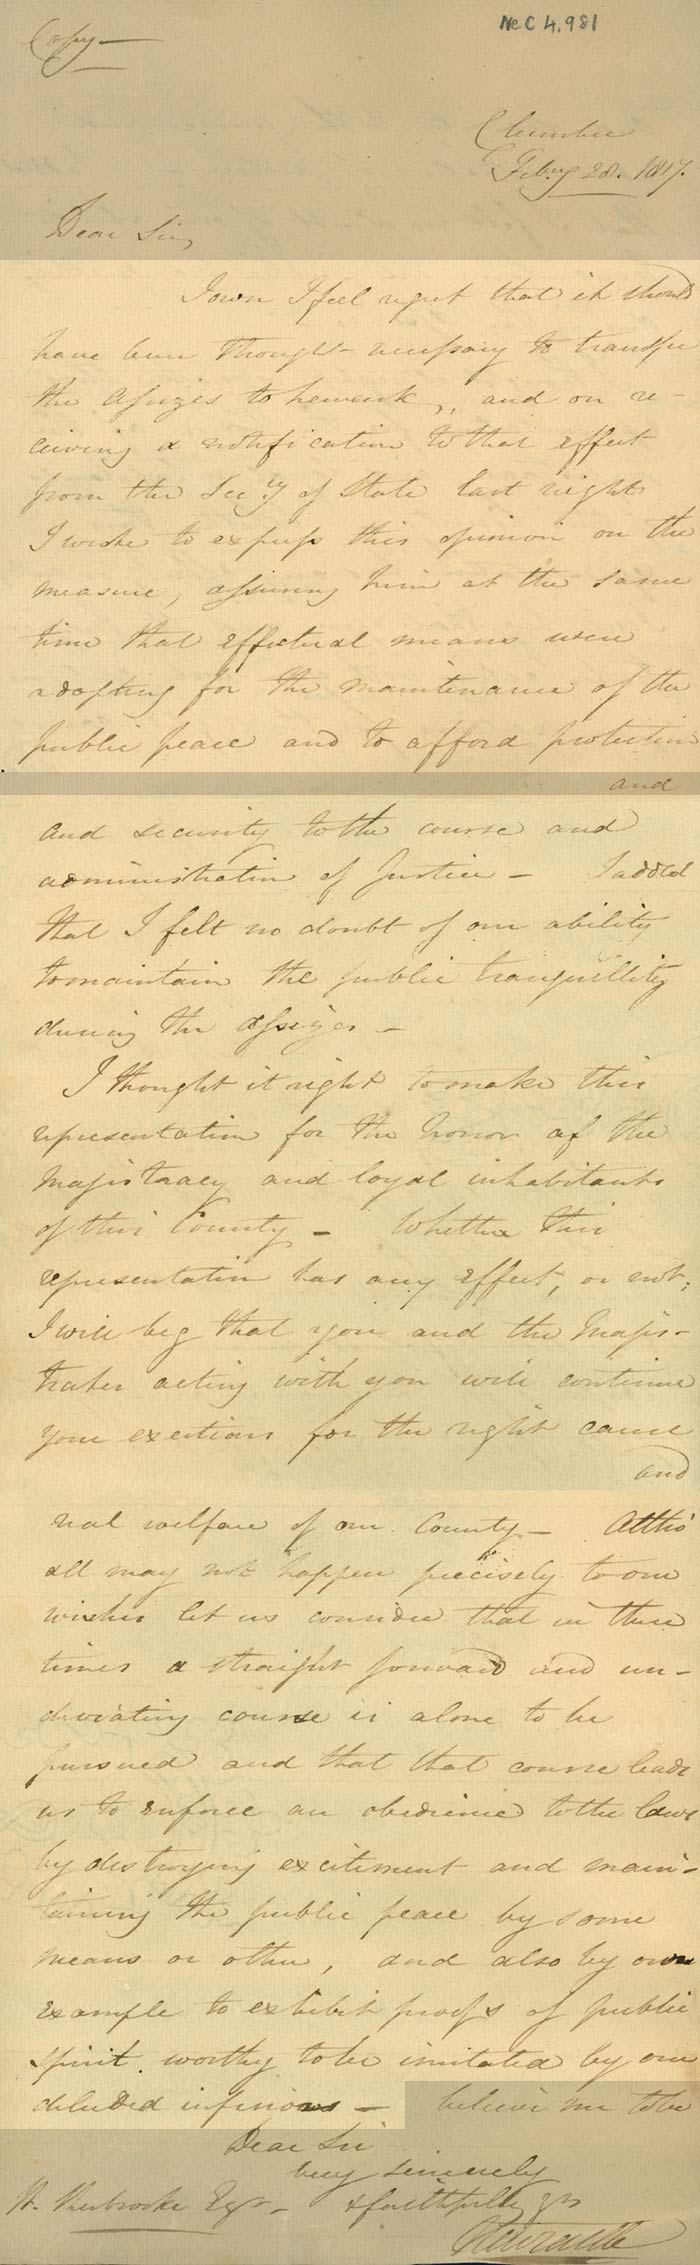 Letter from Newcastle, Clumber, to William Sherbrooke, Oxton, 28 February 1817 (Ne C 4981)